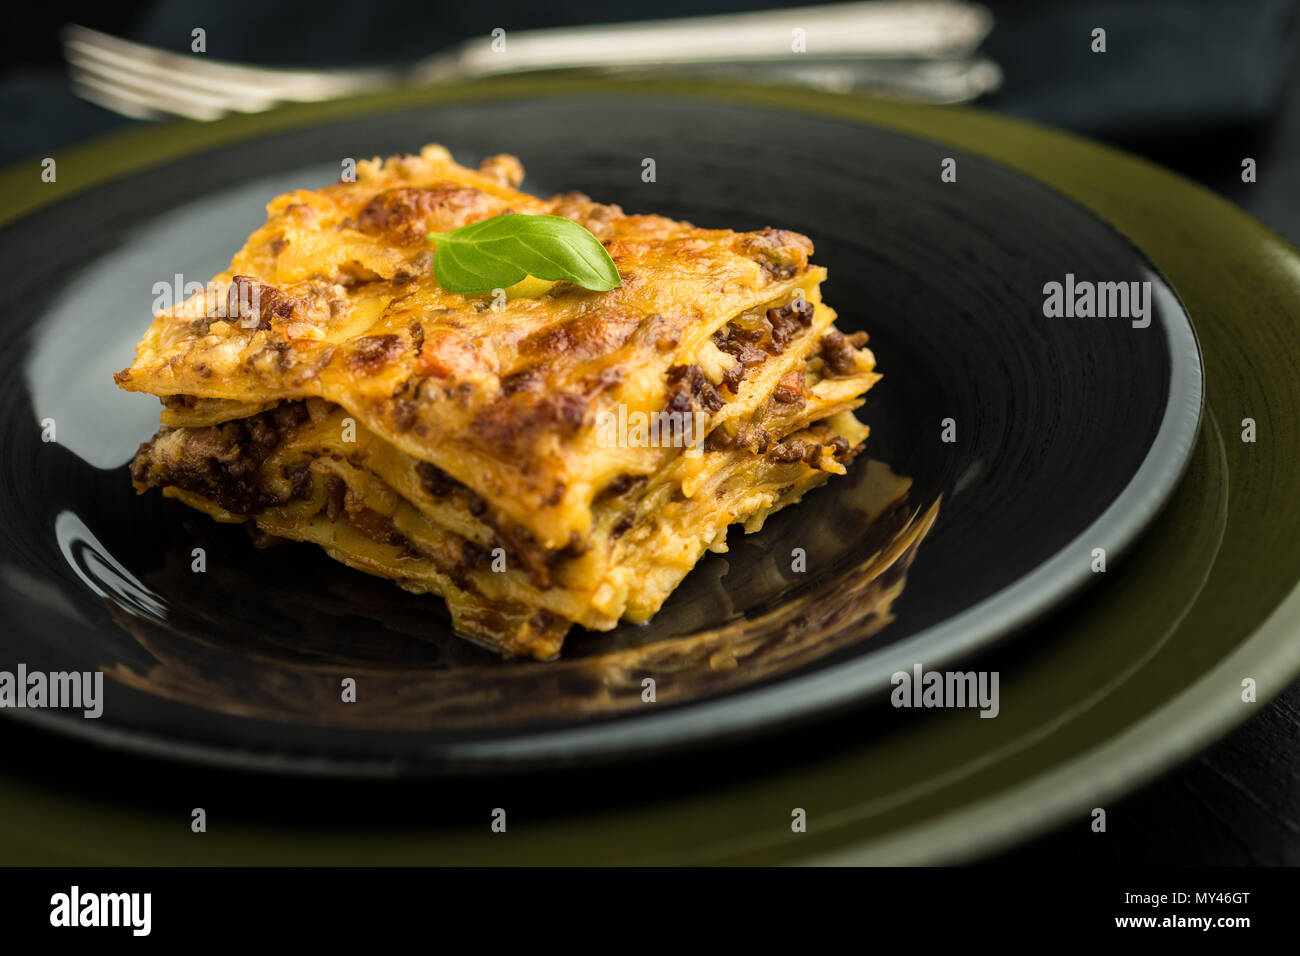 Traditional Lasagna With Minced Beef, Bolognese Sauce and Basil on Dark Plate. Italian Cuisine. Stock Photo